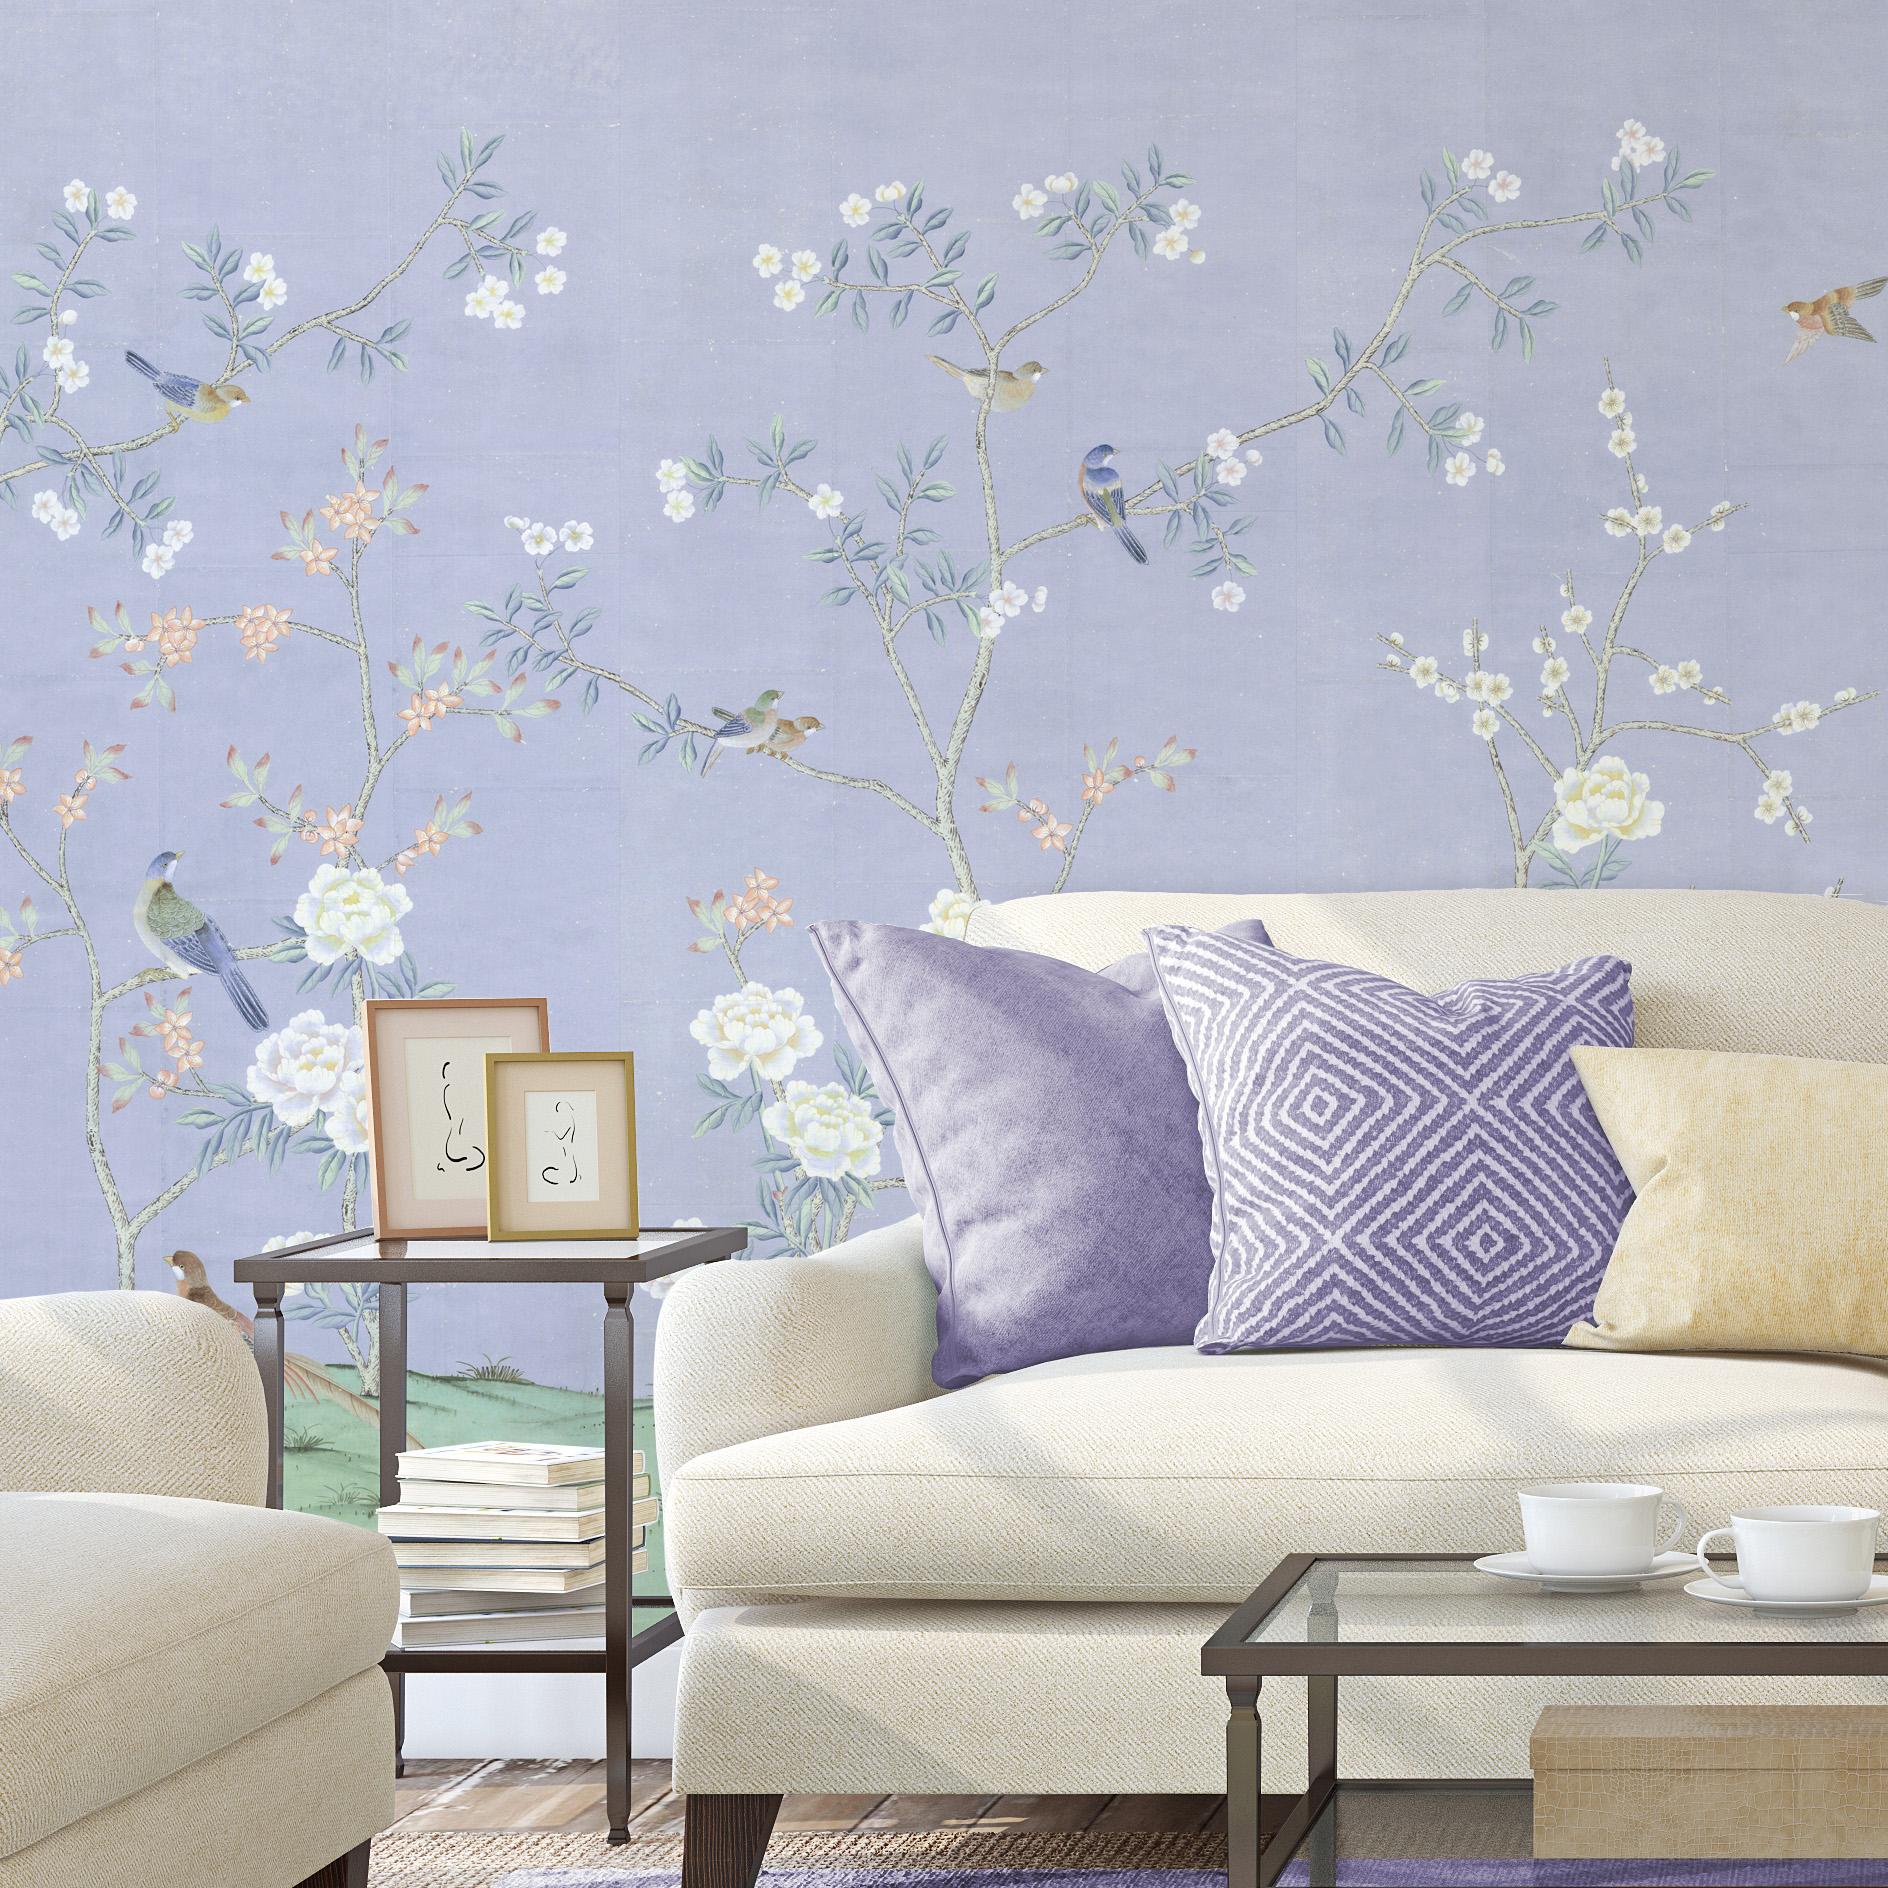 Maysong Hyacinth is a beautiful chinoiserie mural wallpaper with large white blooms on a soothing purple background. This design can add visual interest or color to any bedroom, living room, or any room in your apartment or home. This mural has 4